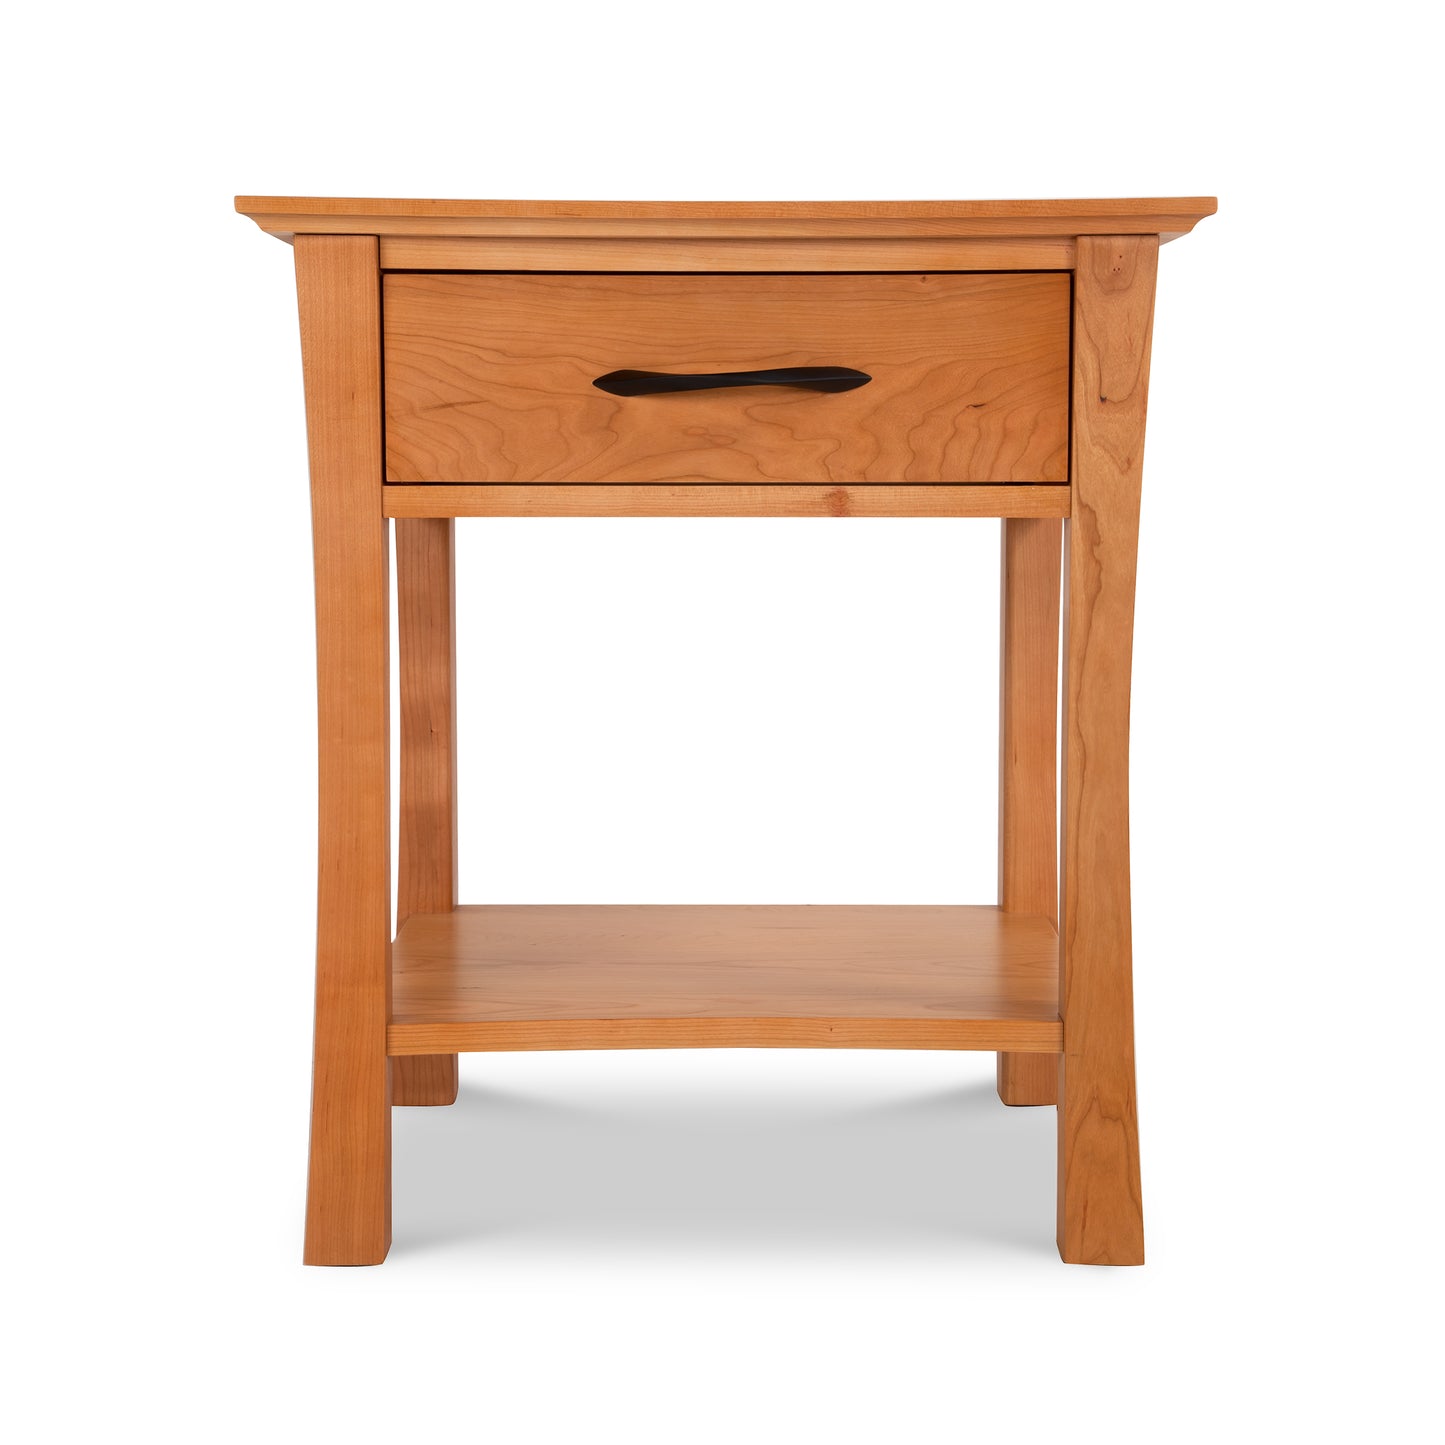 A Lyndon Furniture Green Mountain 1-Drawer Open Shelf Nightstand with a drawer on top.